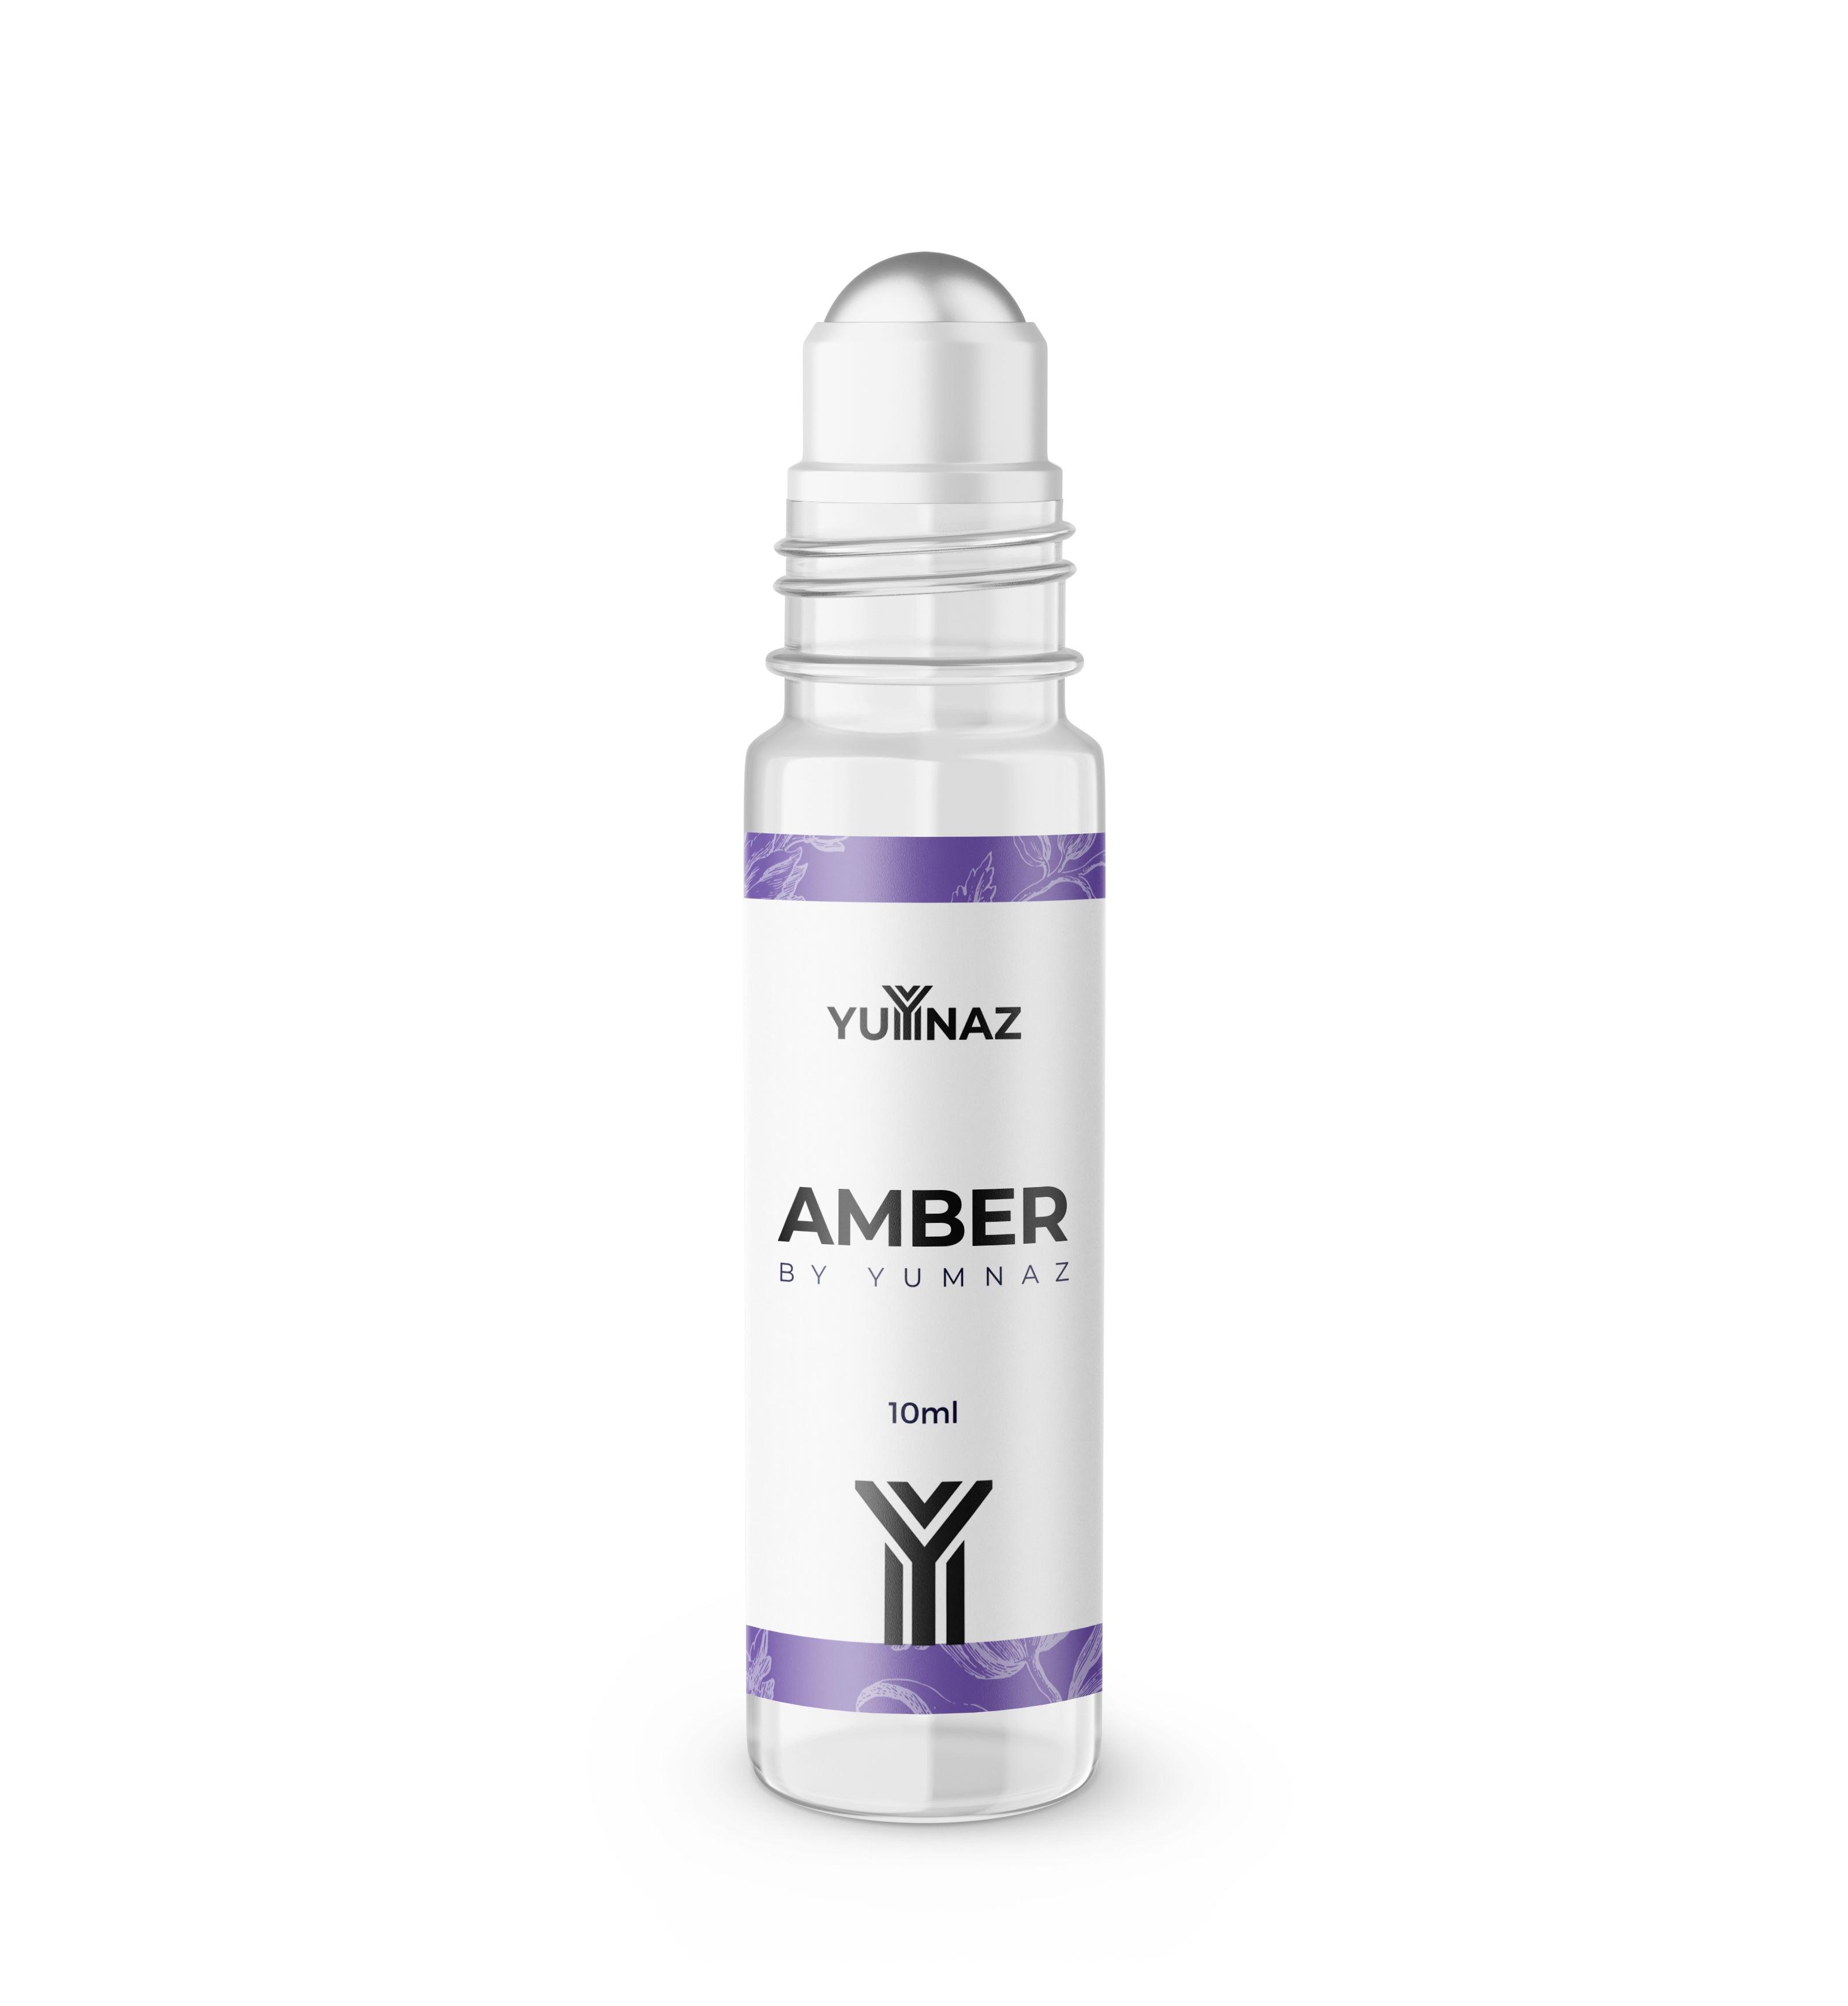 Get the best price of Amber Perfume in Pakistan - yumnaz